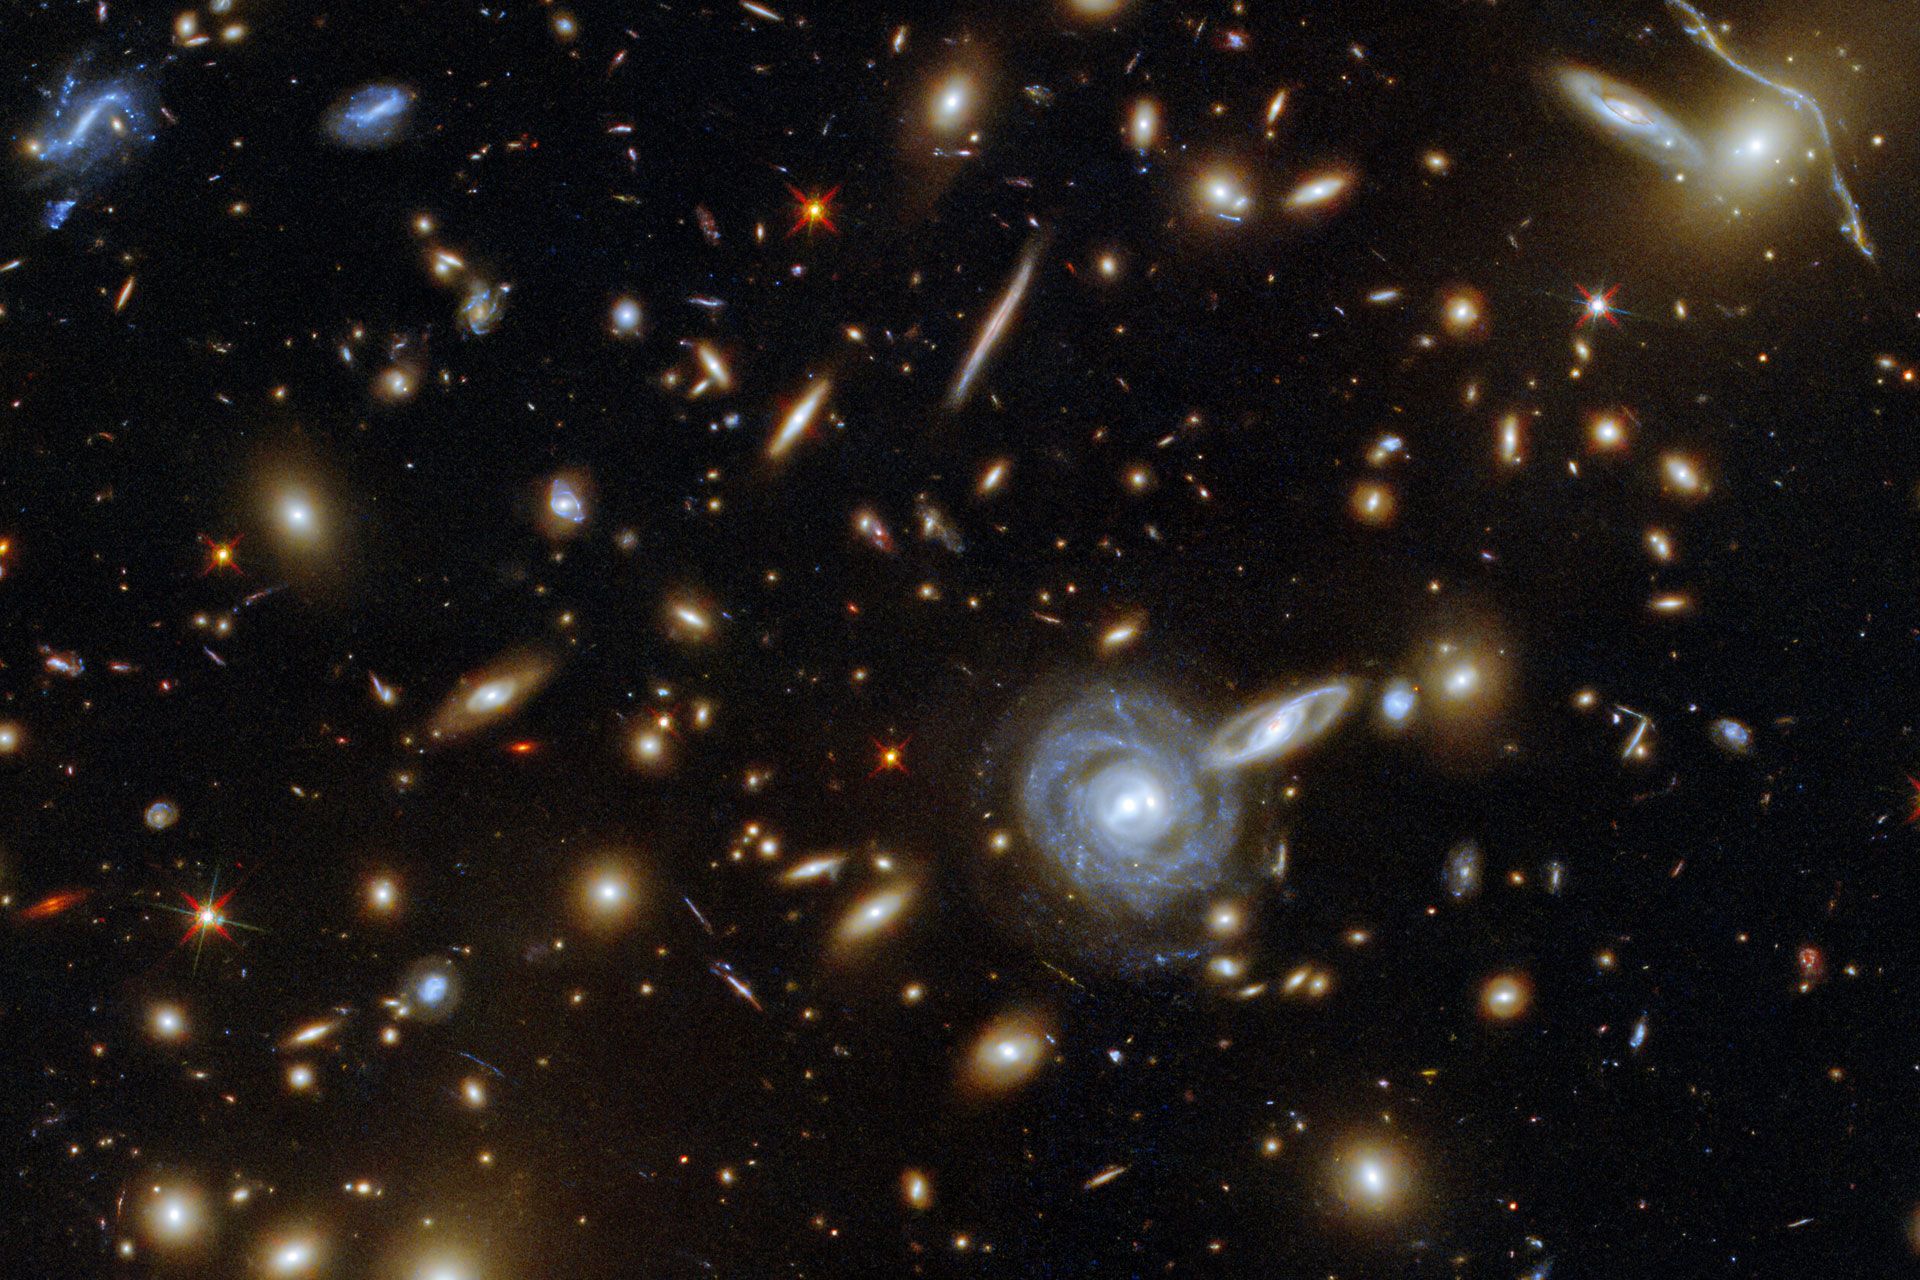 Galaxy cluster with foreground and background galaxies